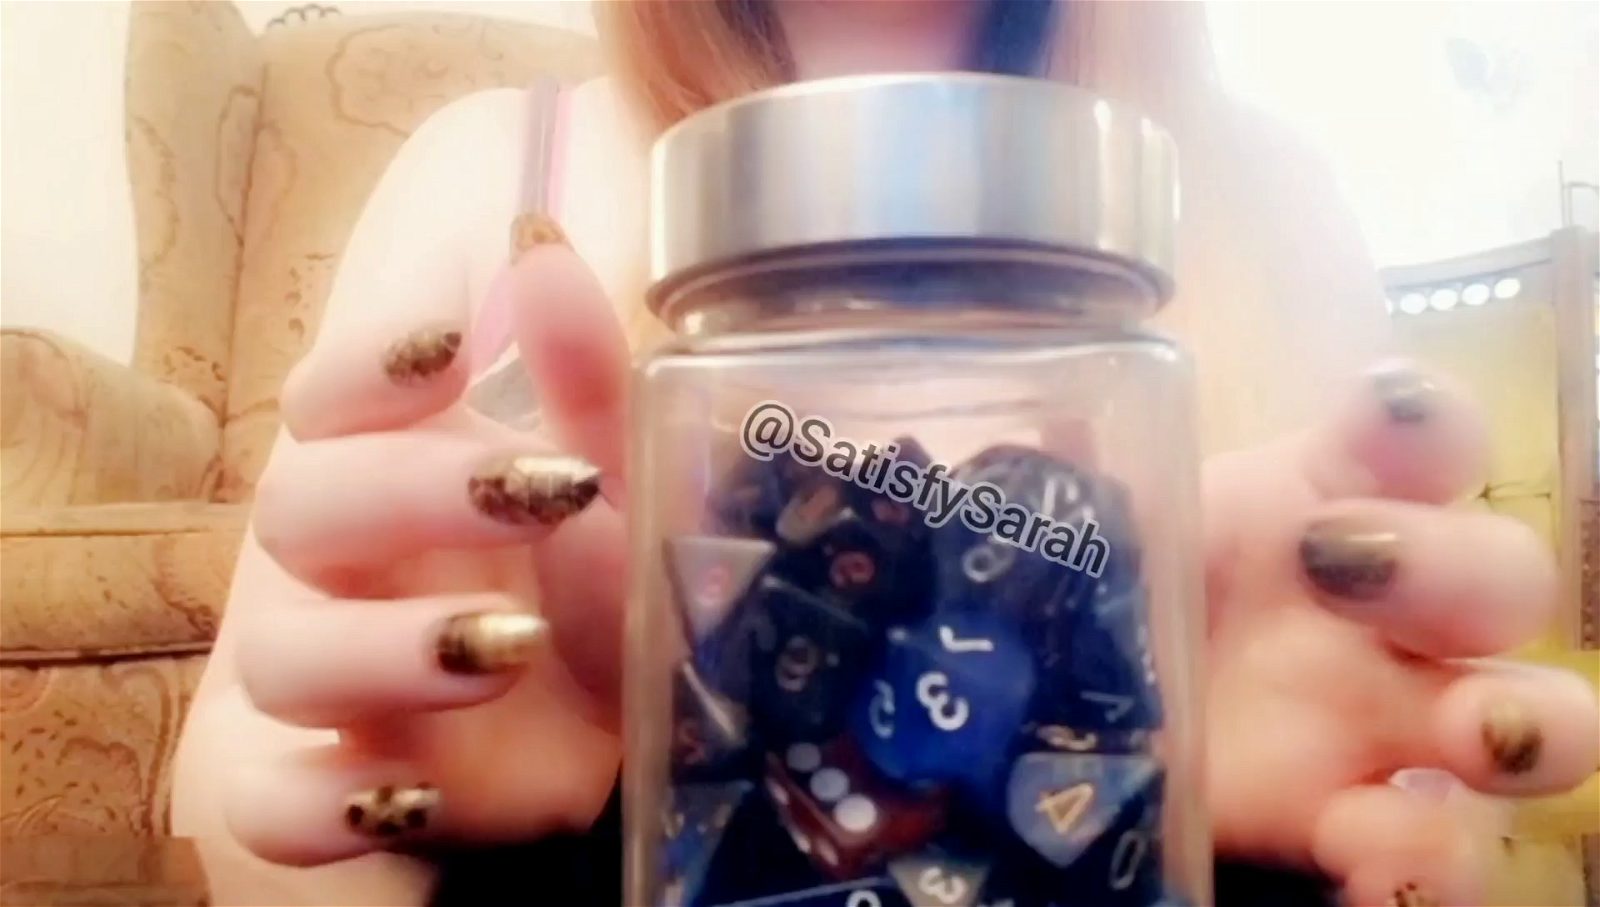 Video by satisfysarah with the username @satisfysarah, who is a star user,  December 9, 2020 at 9:33 PM. The post is about the topic Videos and the text says 'https://iwantclips.com/store/73082/SatisfySarah/2026313/ASMR-Nail-Tapping-TALKING

https://iwantclips.com/store/73082/SatisfySarah/2026178/ASMR-Nail-Tapping-NO-TALKING'